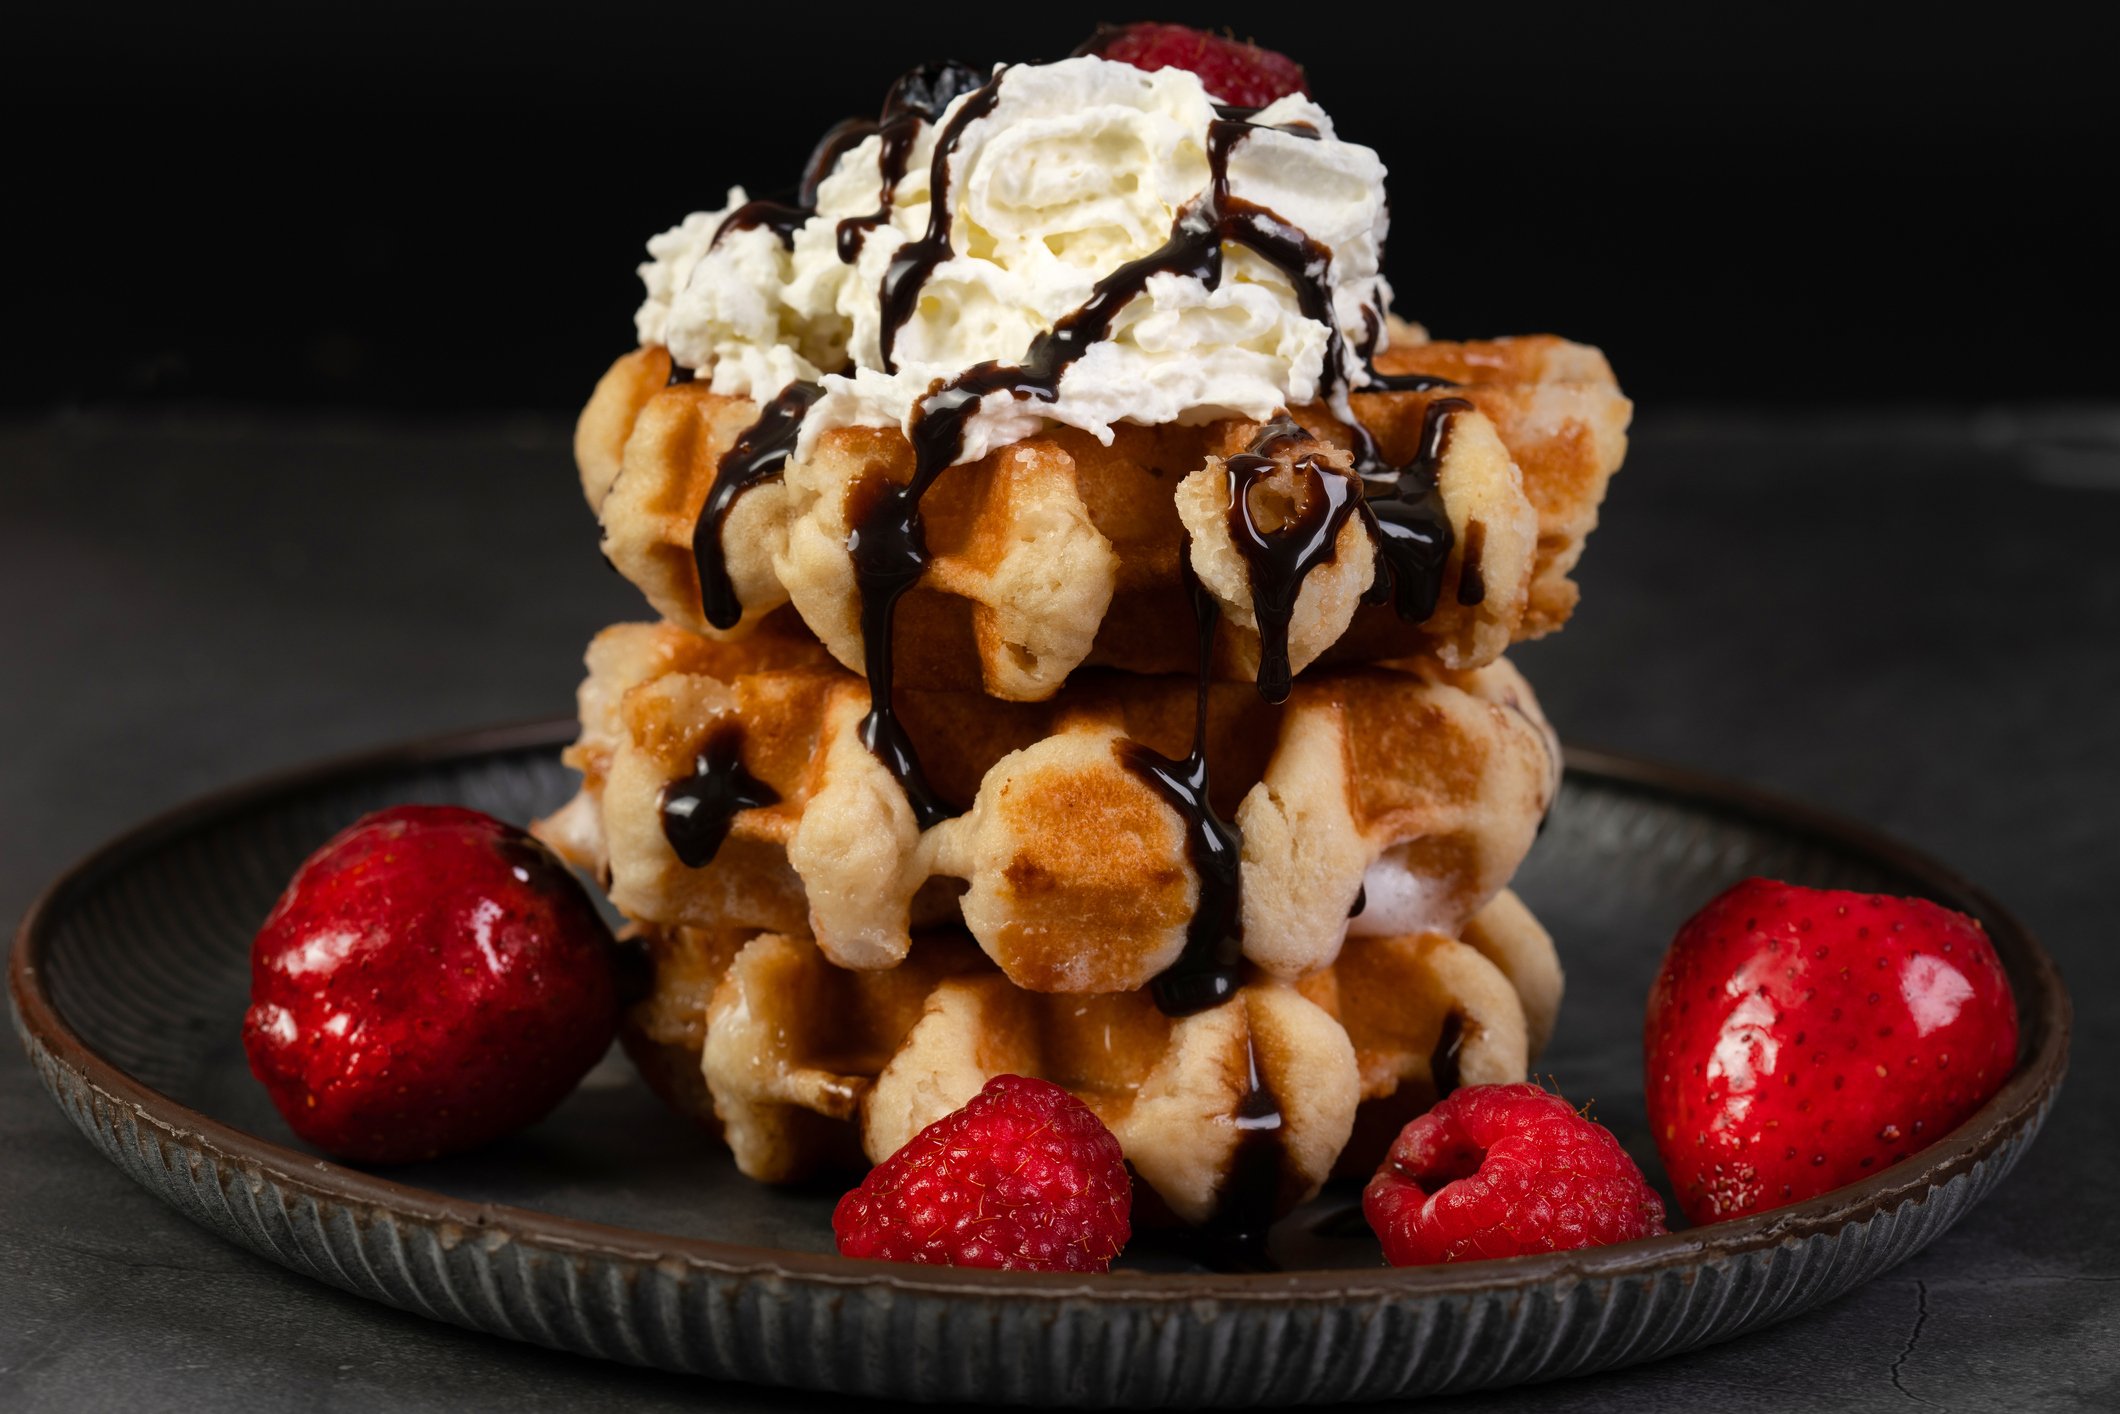 Belgian waffles with whipped cream and berries